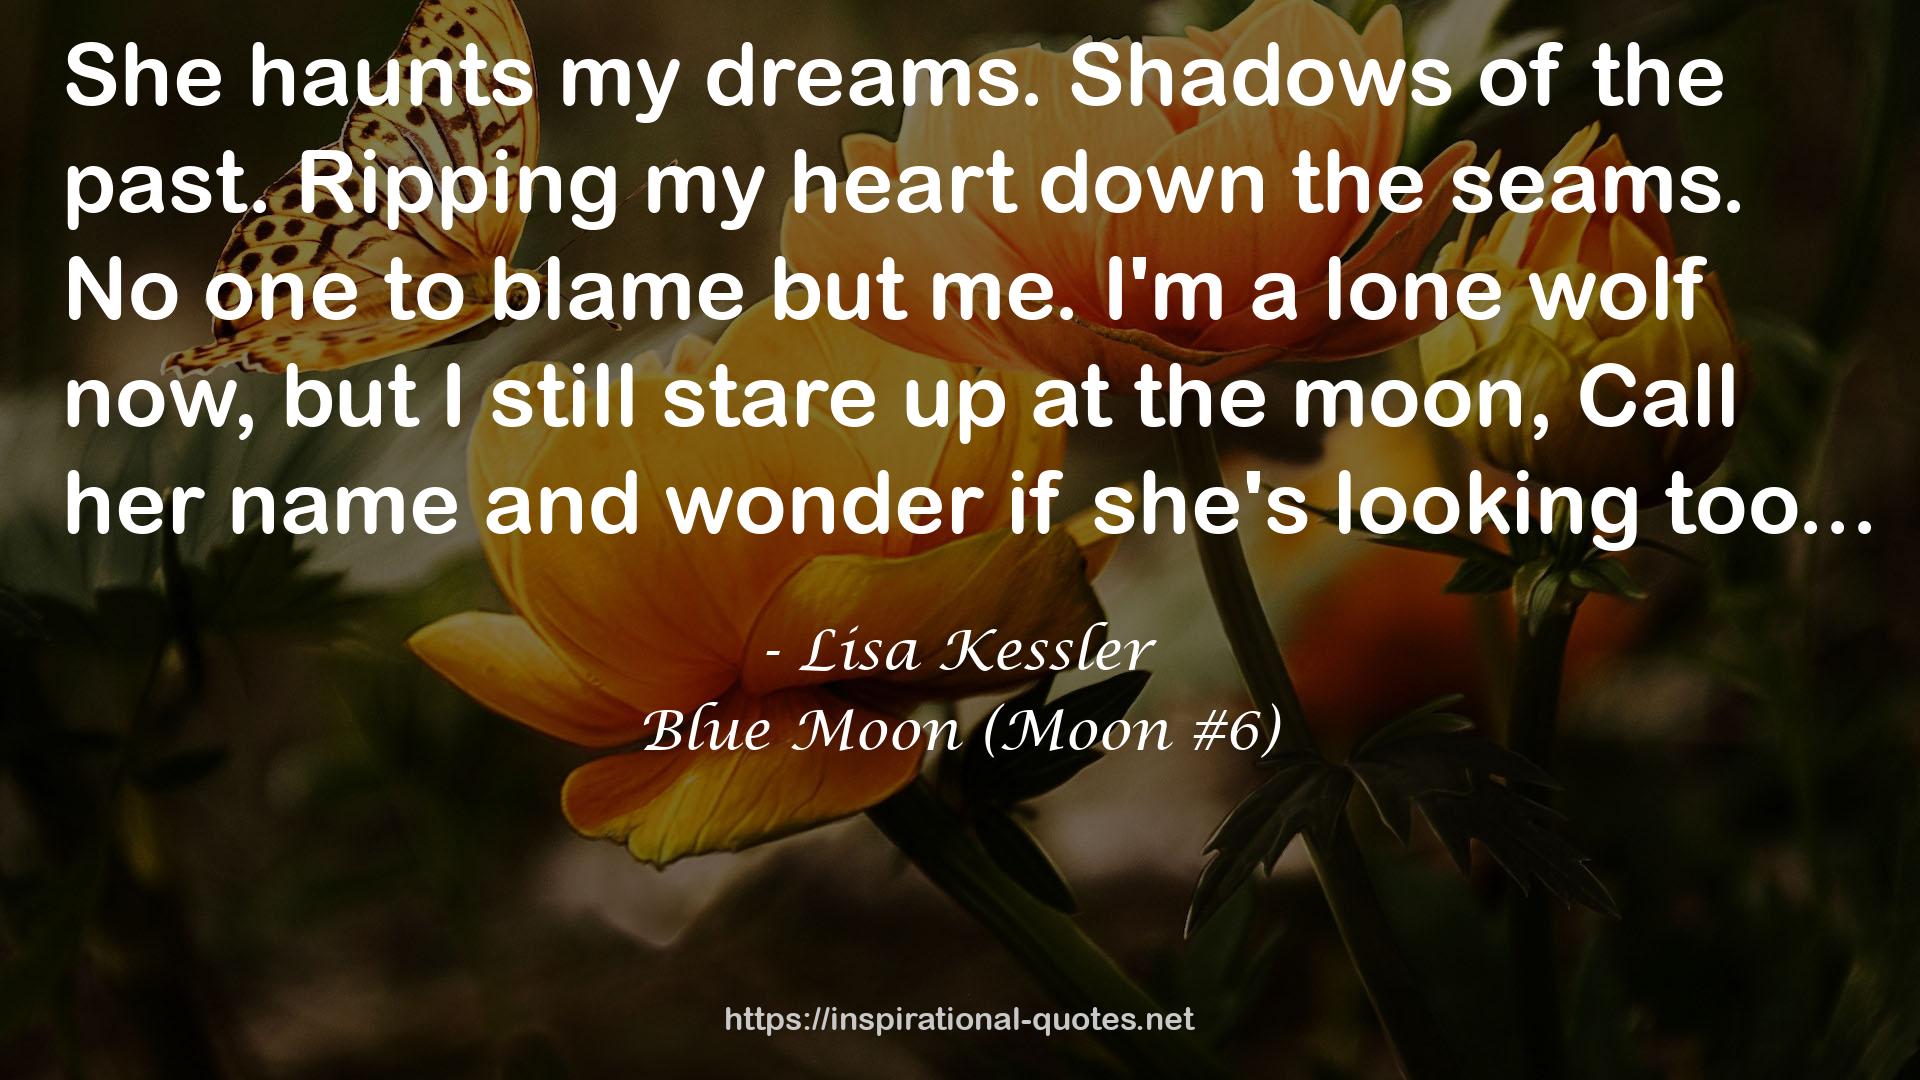 Blue Moon (Moon #6) QUOTES